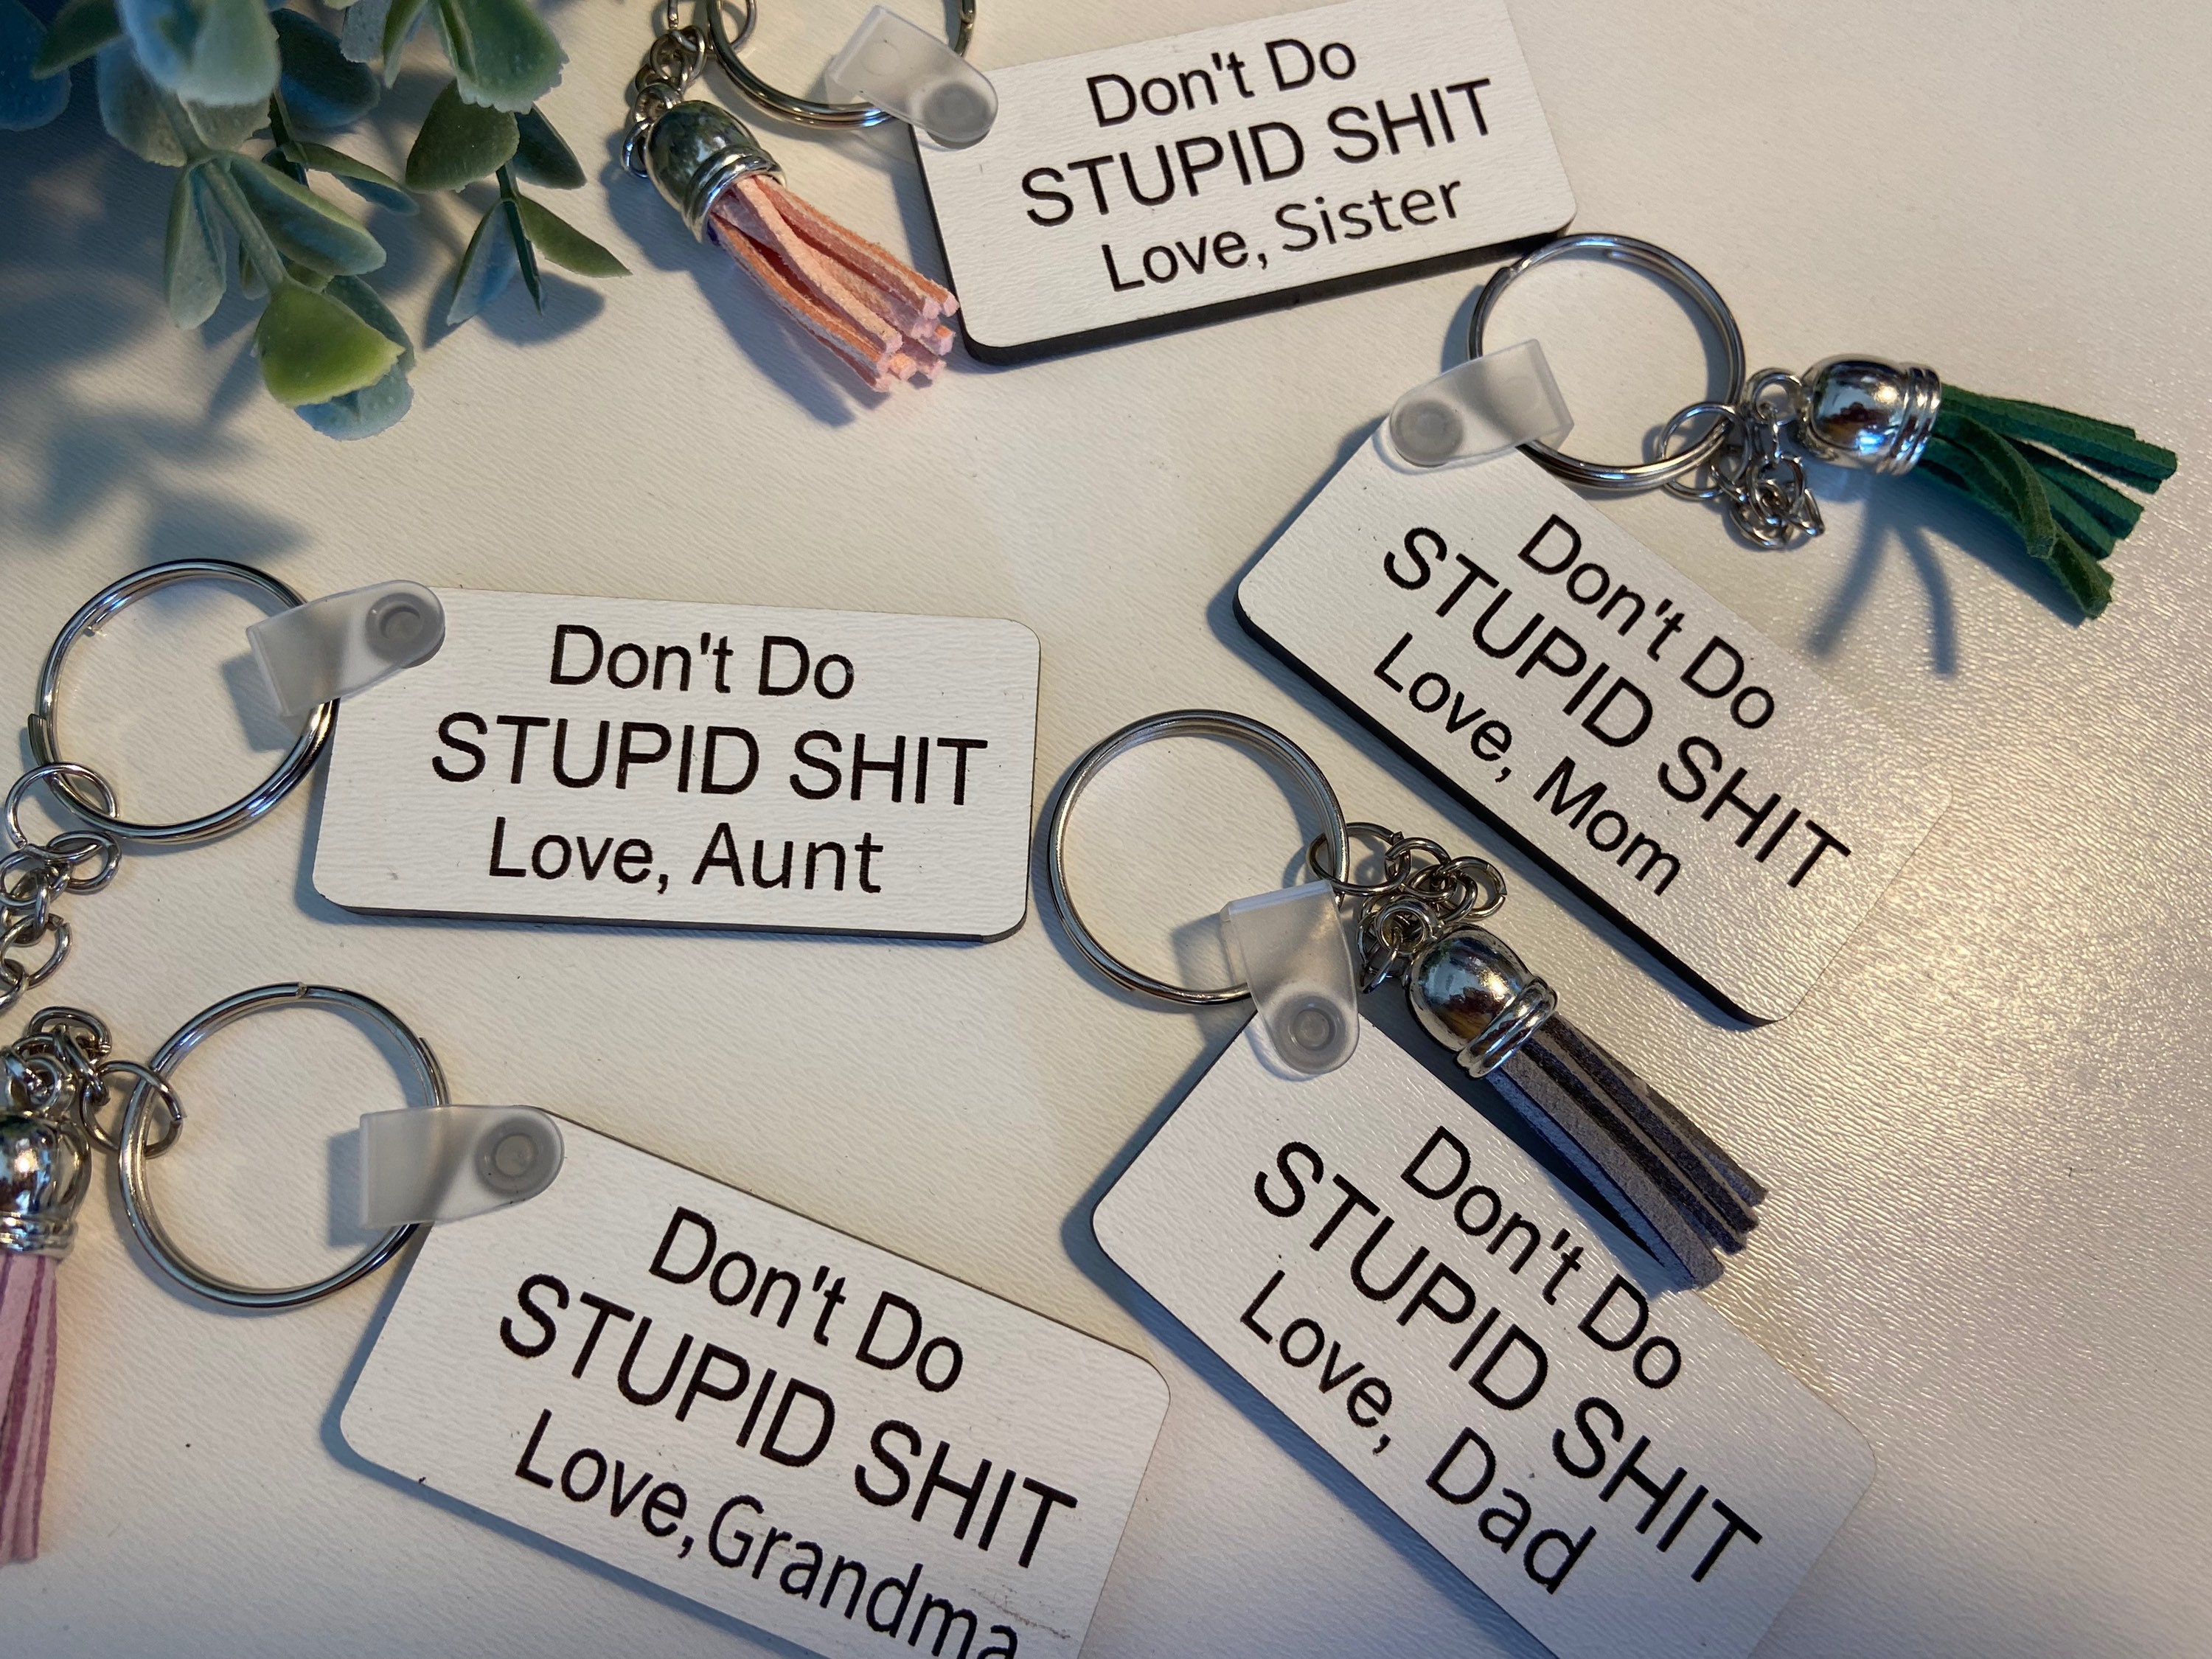 Dont Do Stupid Shit Love Mom Keychain / Don't Do Stupid Shit Love Dad  Keychain / Don't Do Stupid Shit / Wooden Keychain /funny Keychain -   Norway